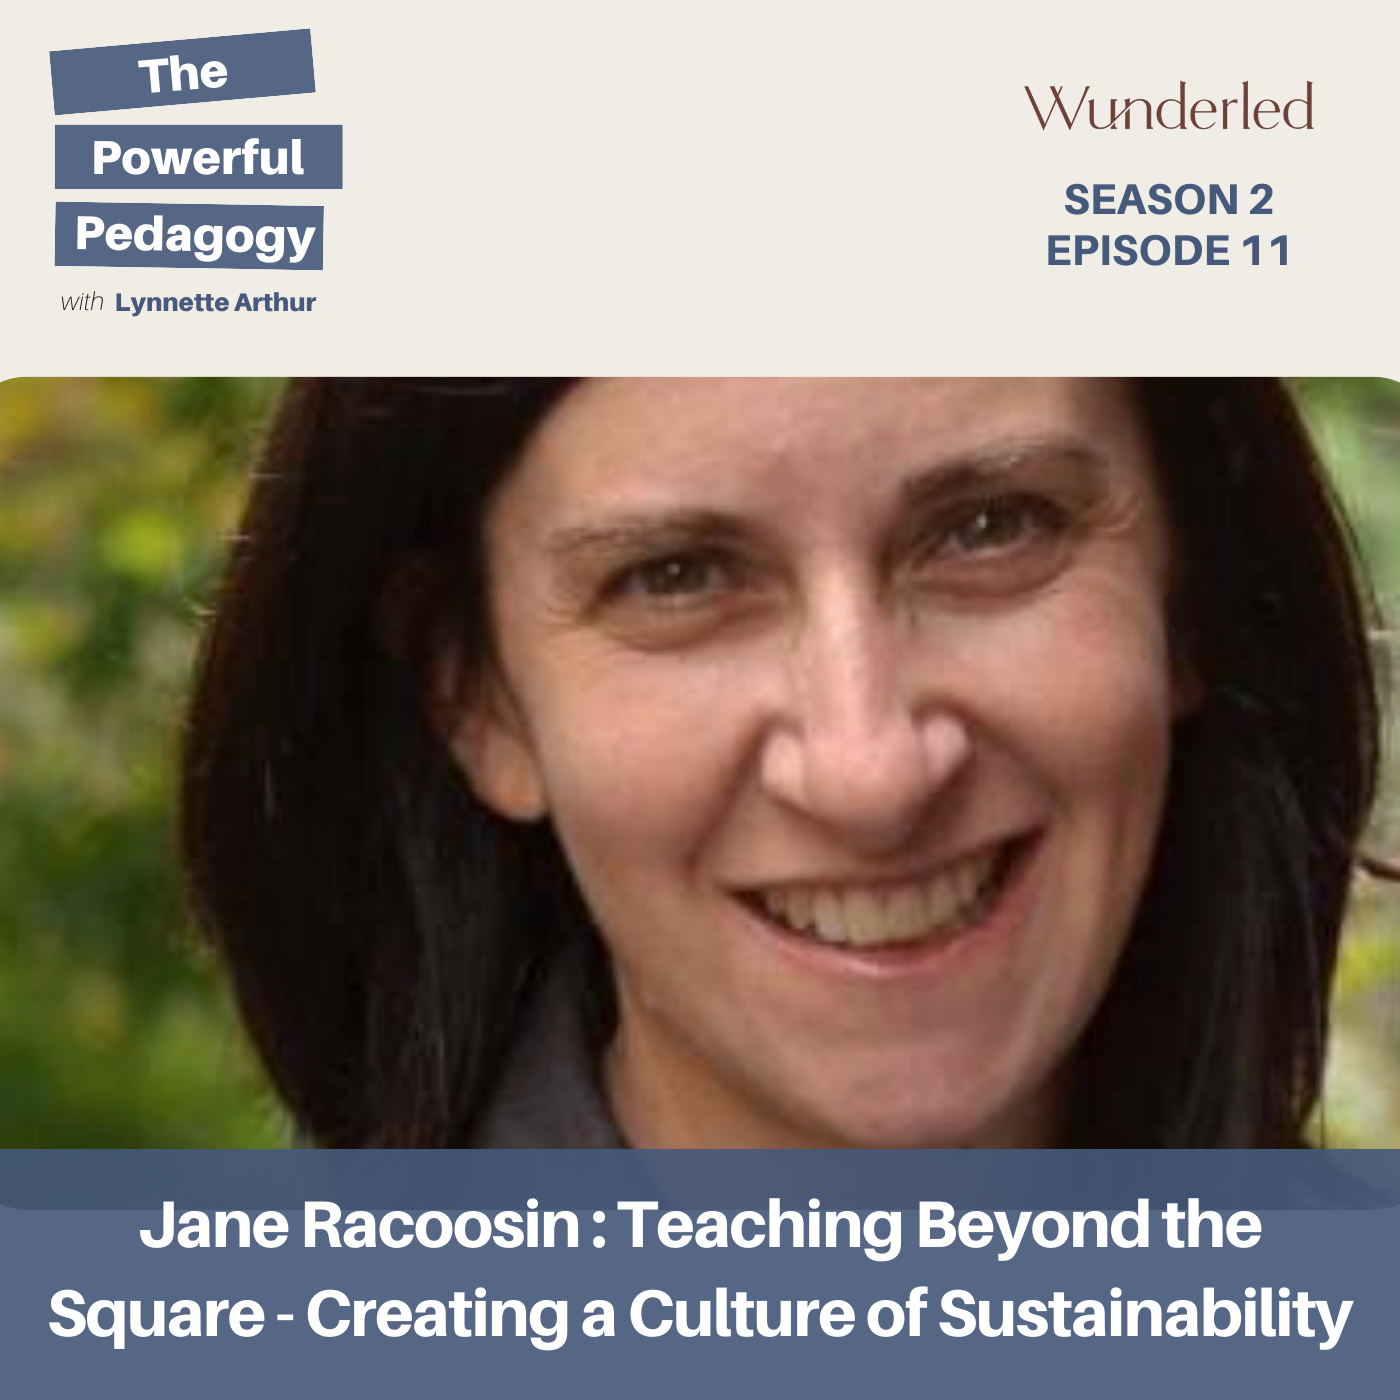 Jane Racoosin : Teaching Beyond the Square - Creating a Culture of Sustainability